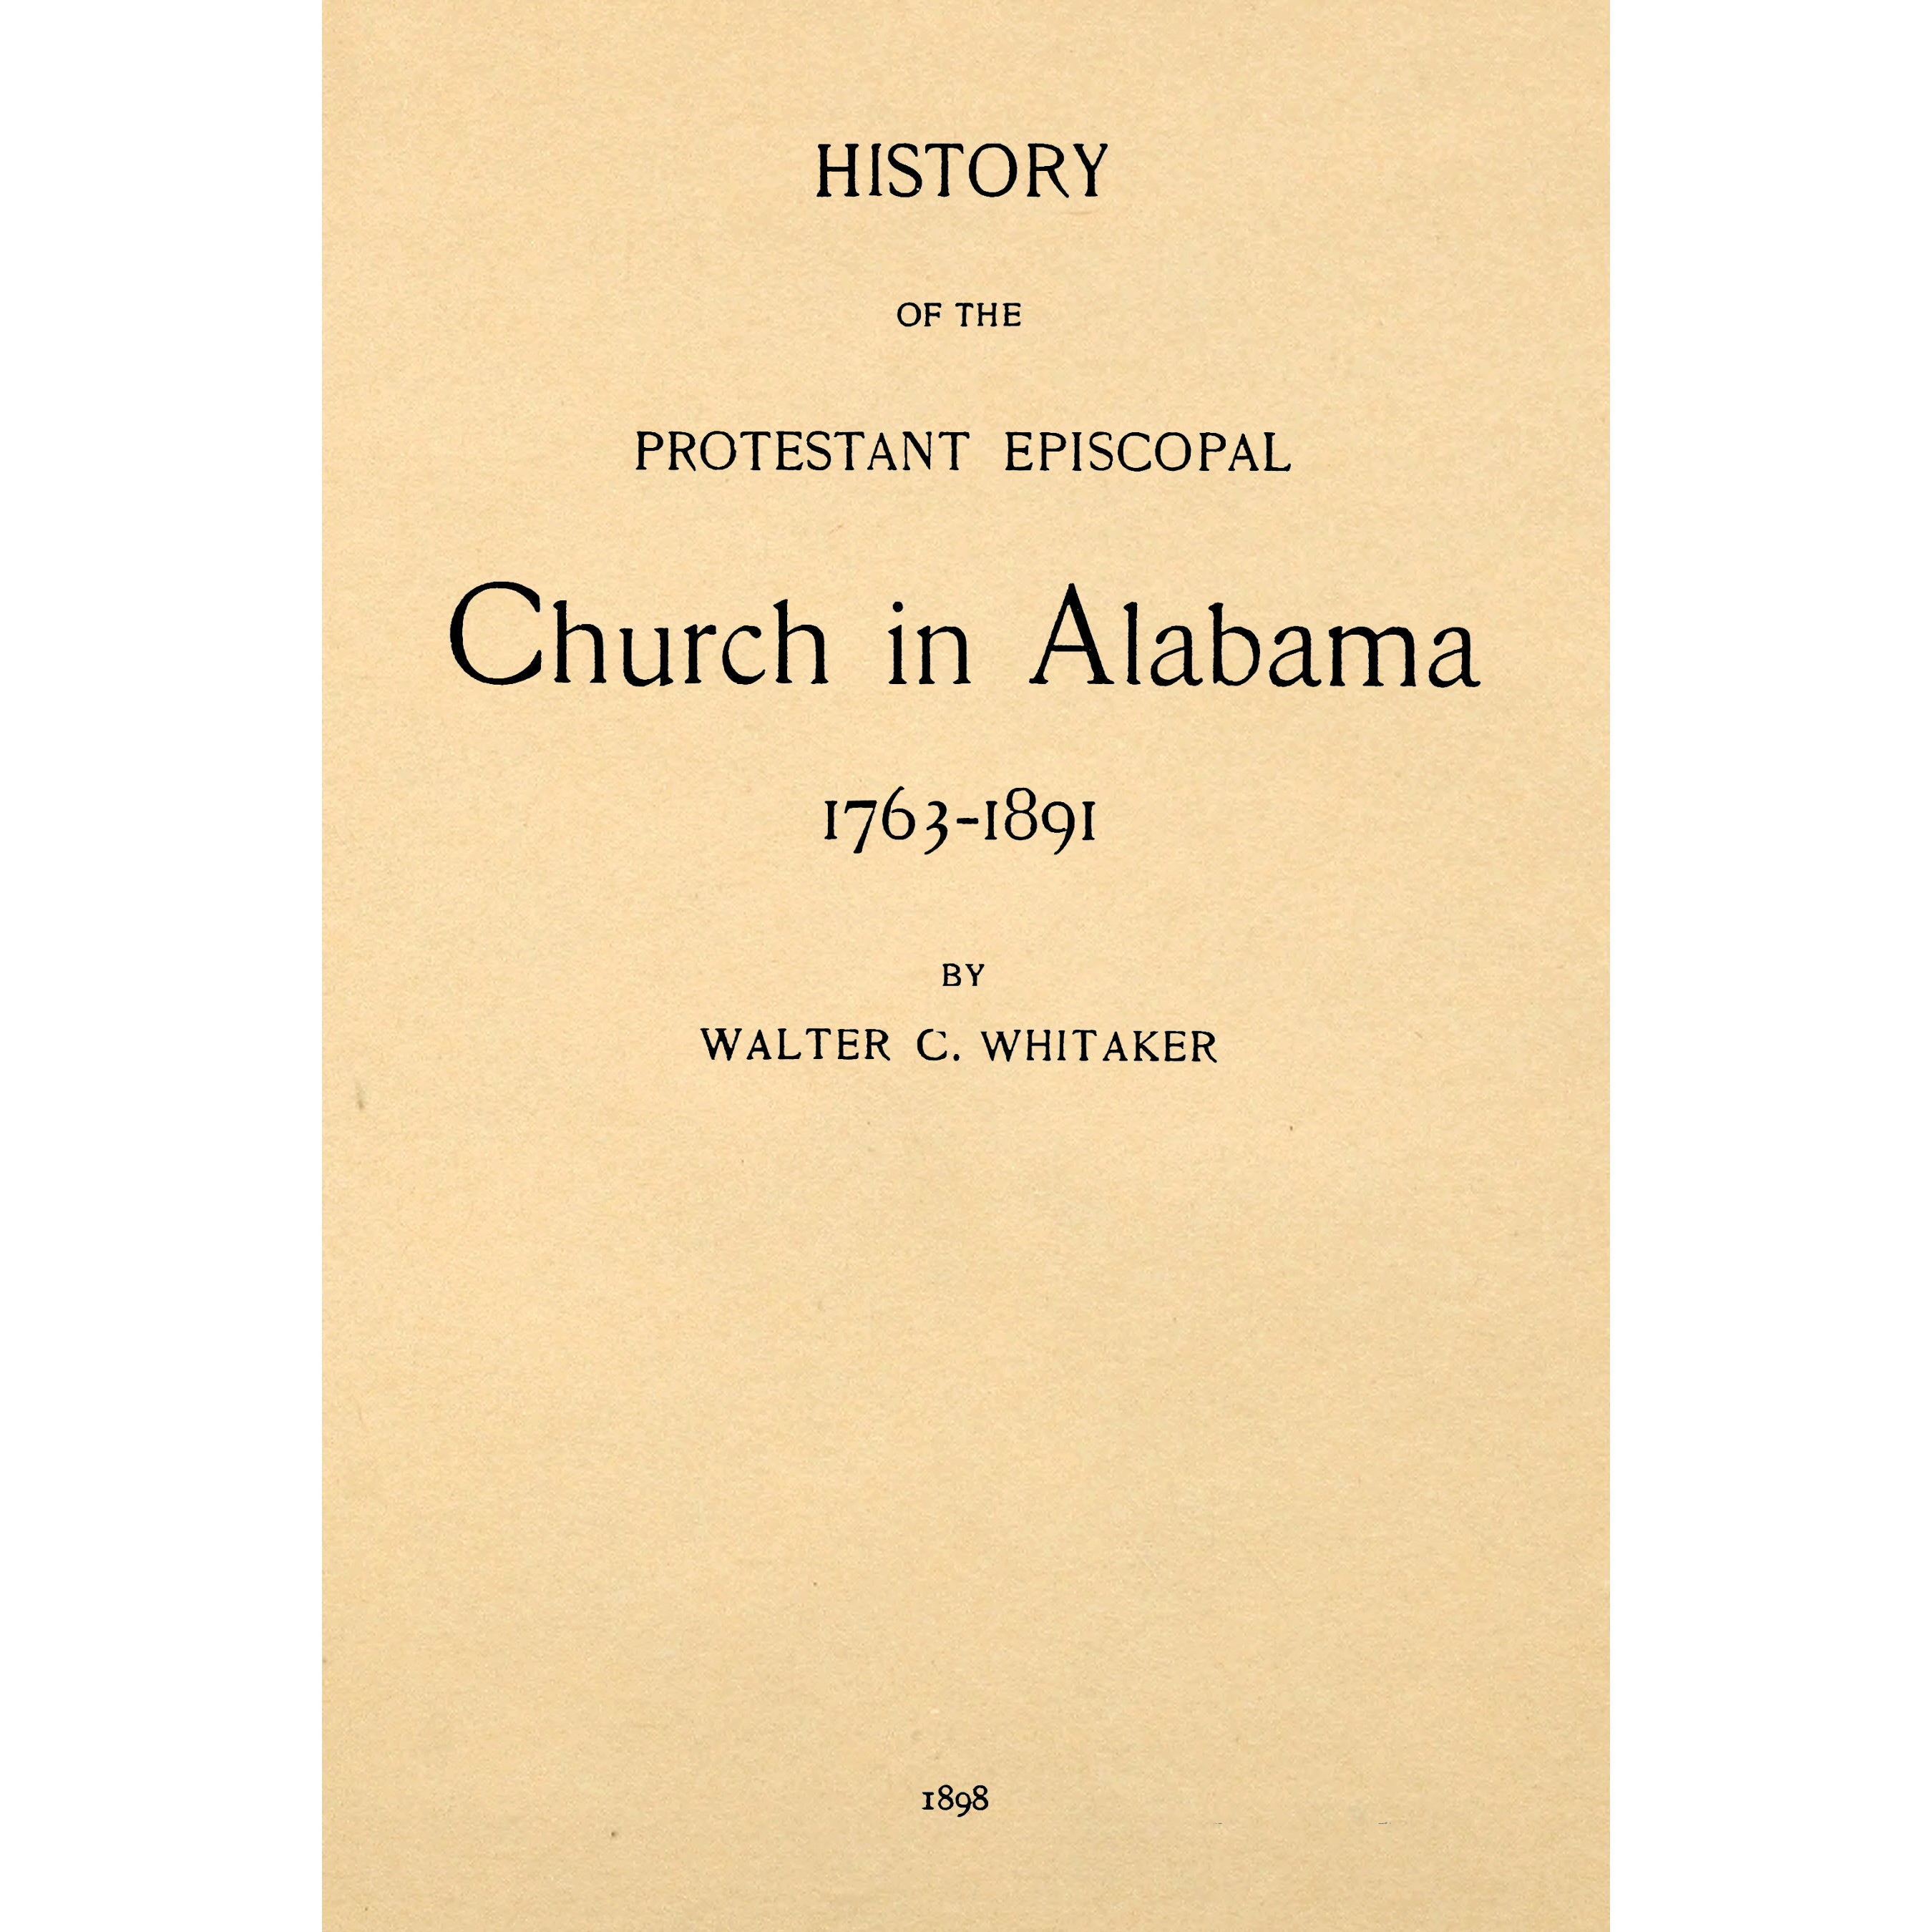 History of the Protestant Episcopal church in Alabama, 1763-1891